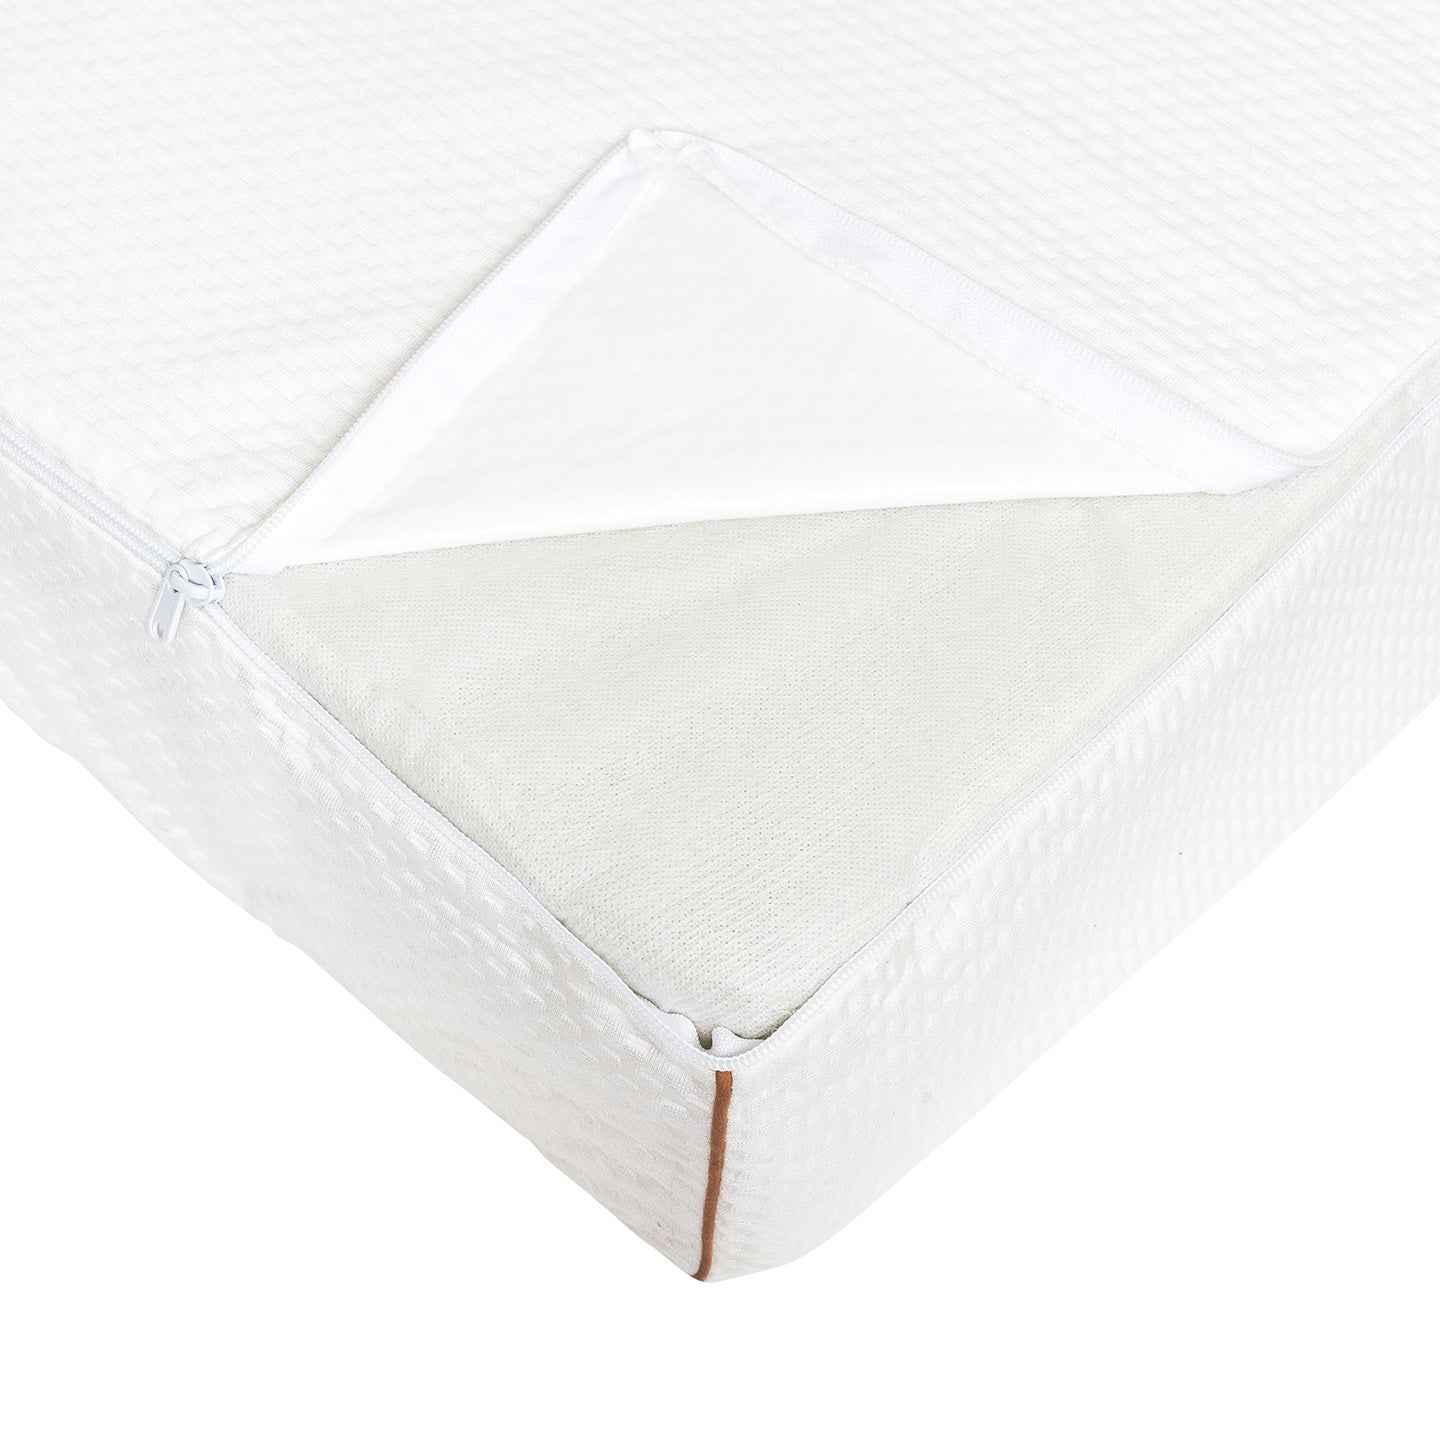 Close-up view of unzipped baby mattress cover